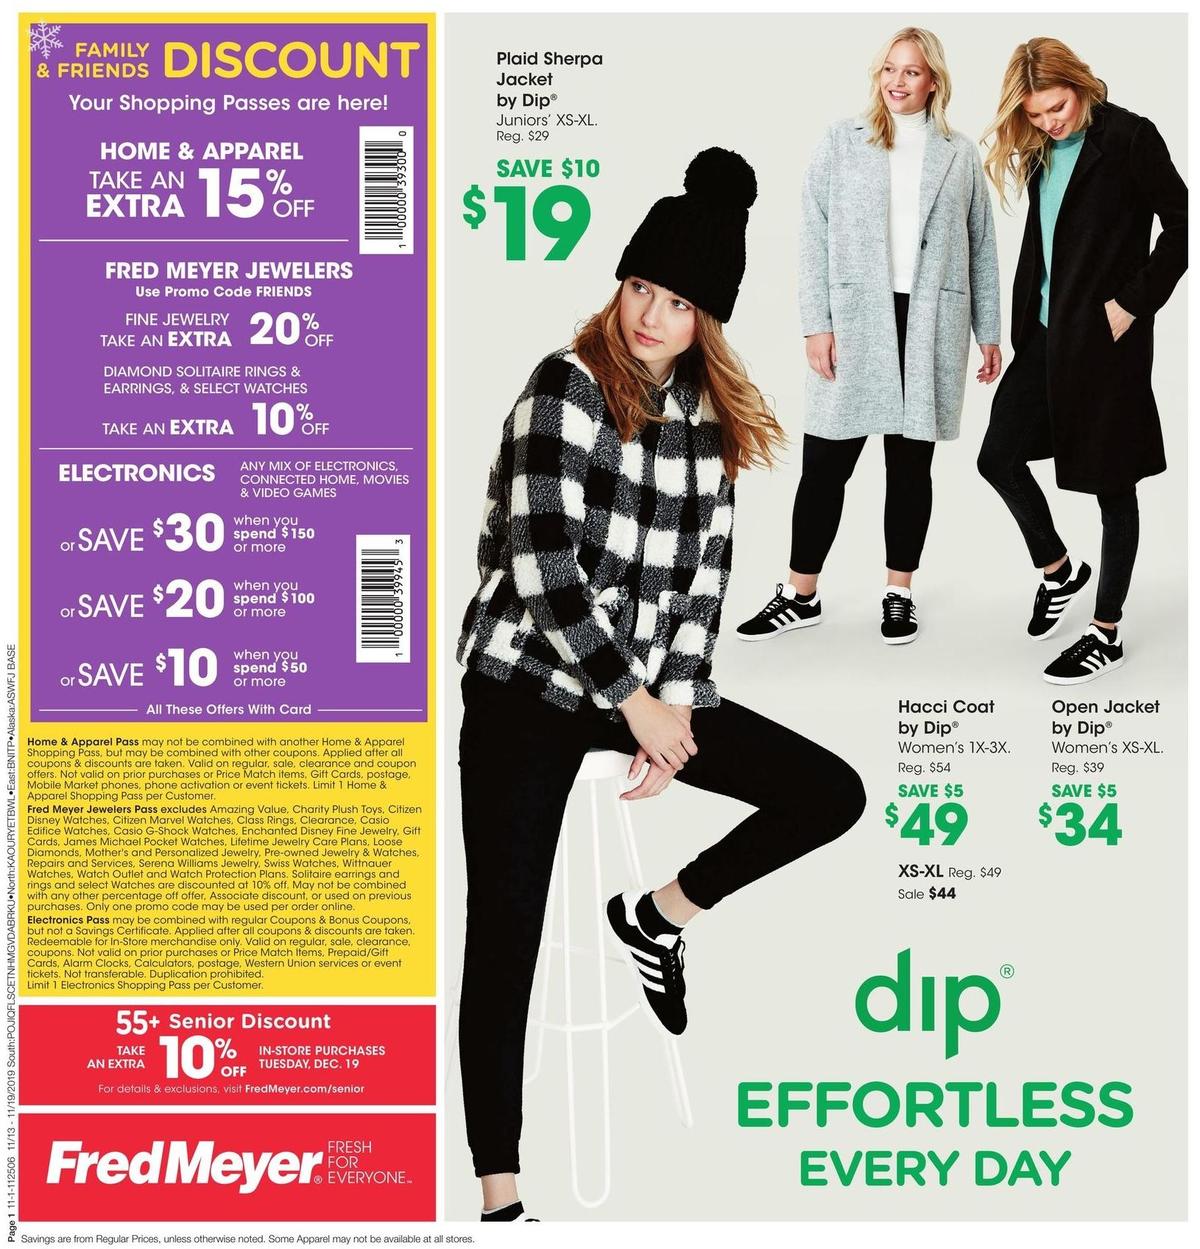 Fred Meyer Dip Apparel Weekly Ad & Specials from November 13